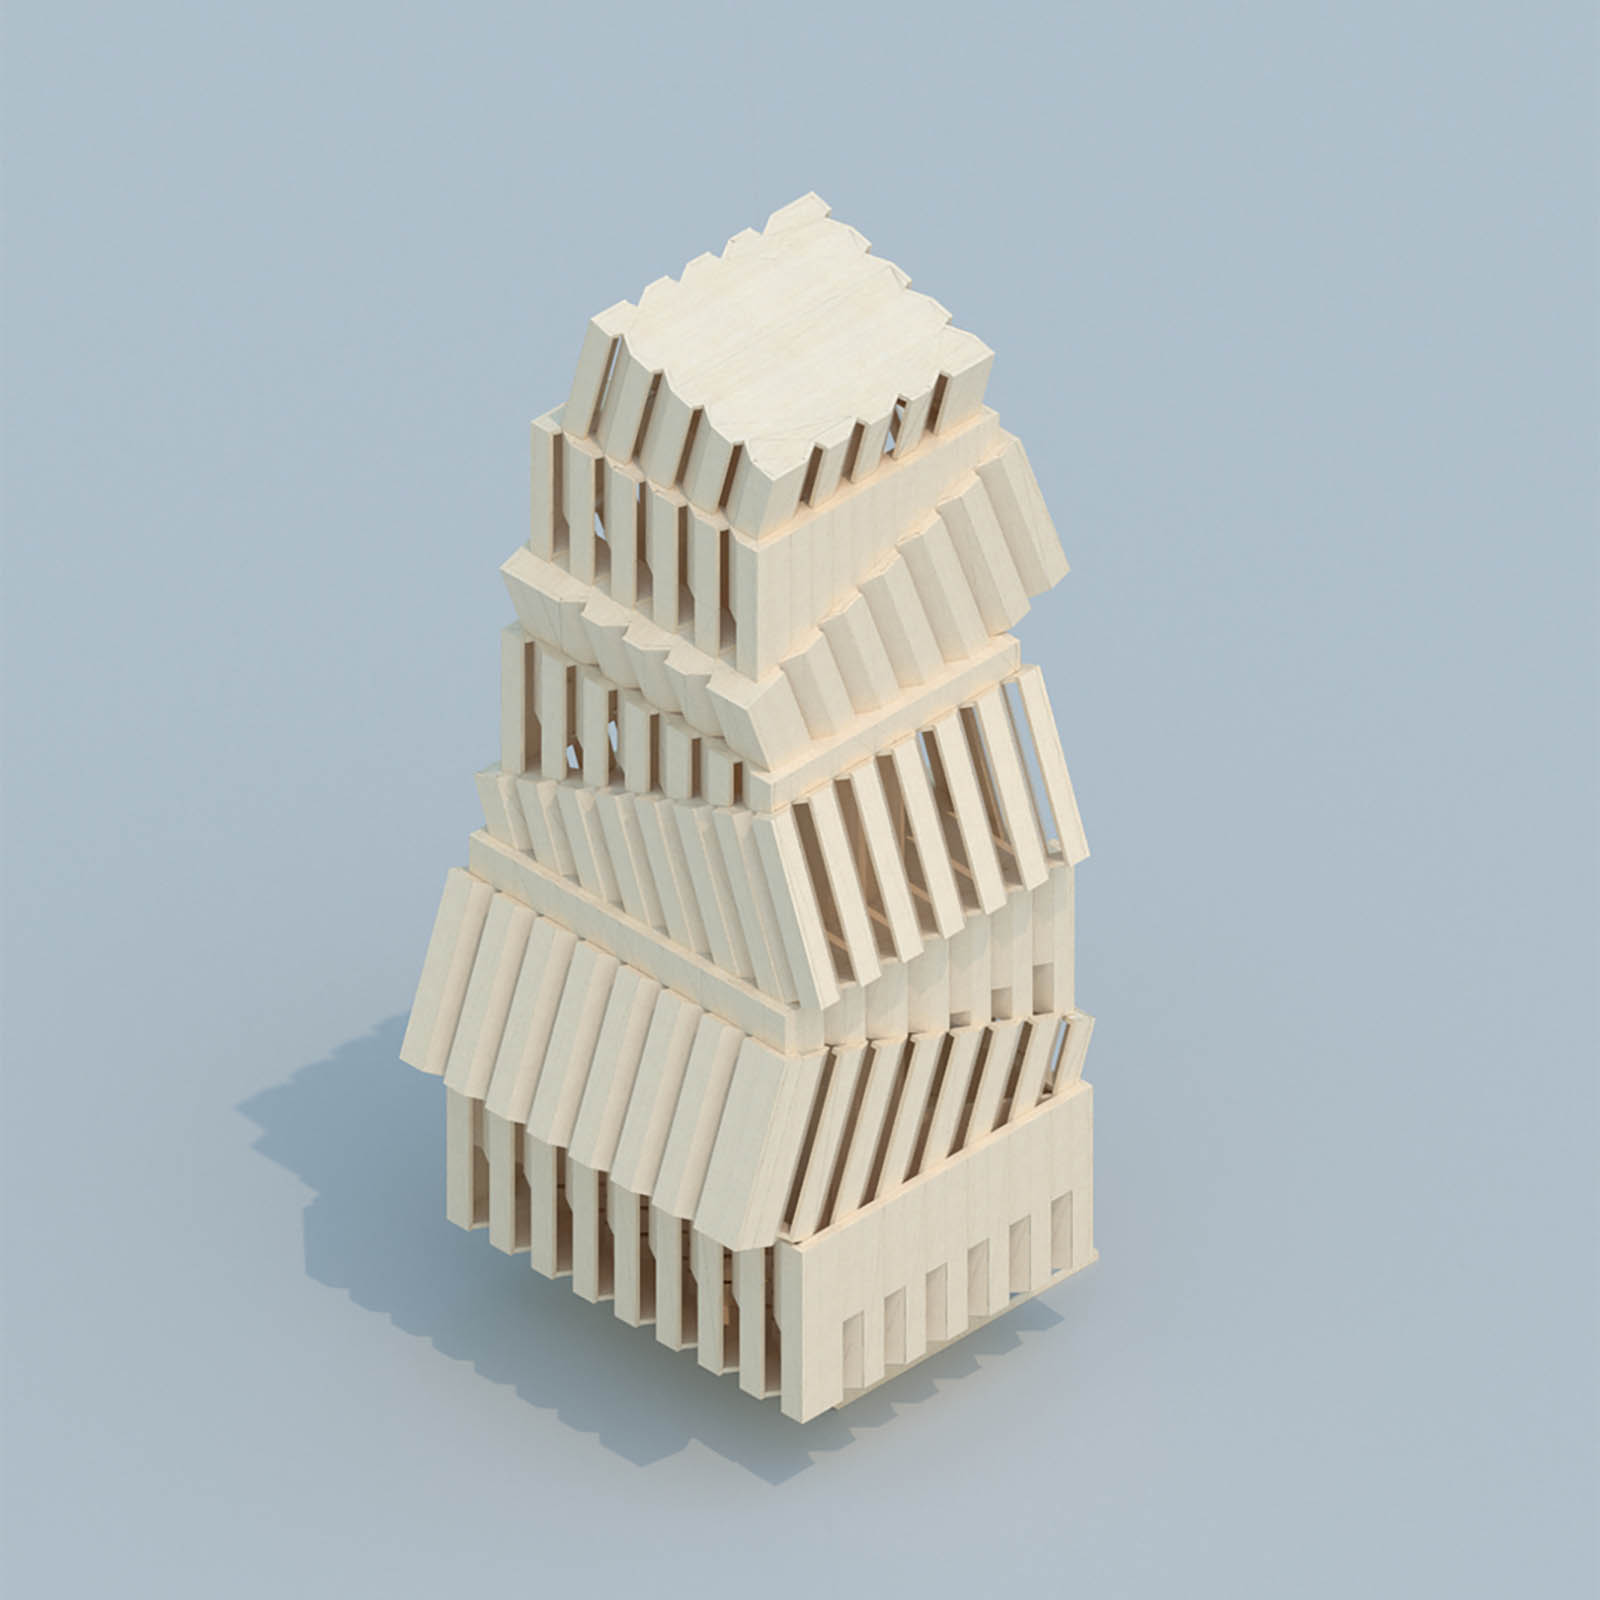 Aryan Khalighy used a simulation of stacked boxes to explore CLT tectonics